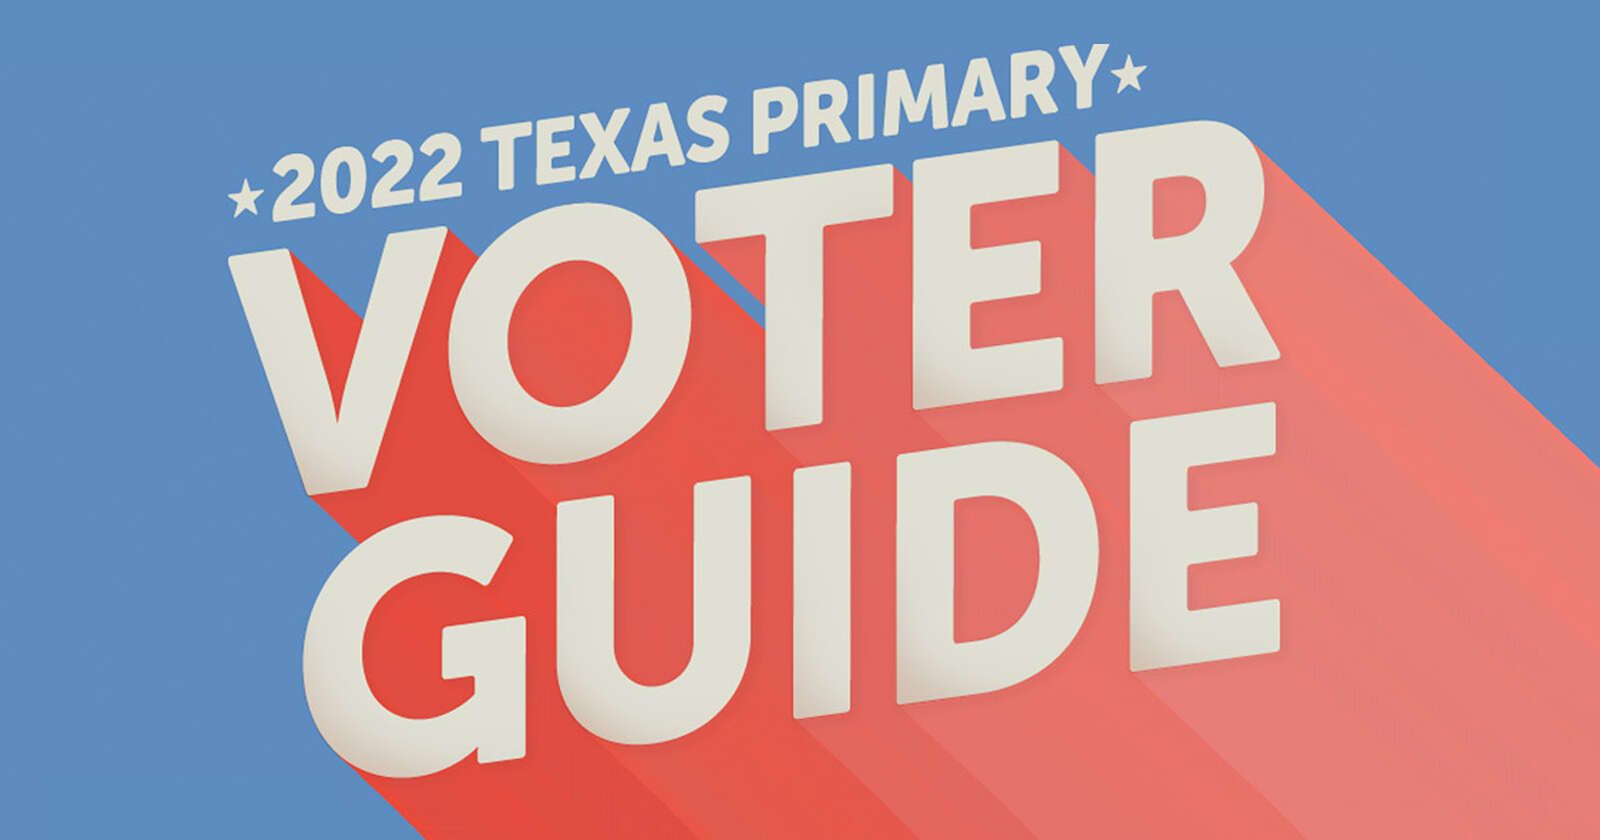 2022 Texas Primary Voter Guide: What to know for the March 1 election